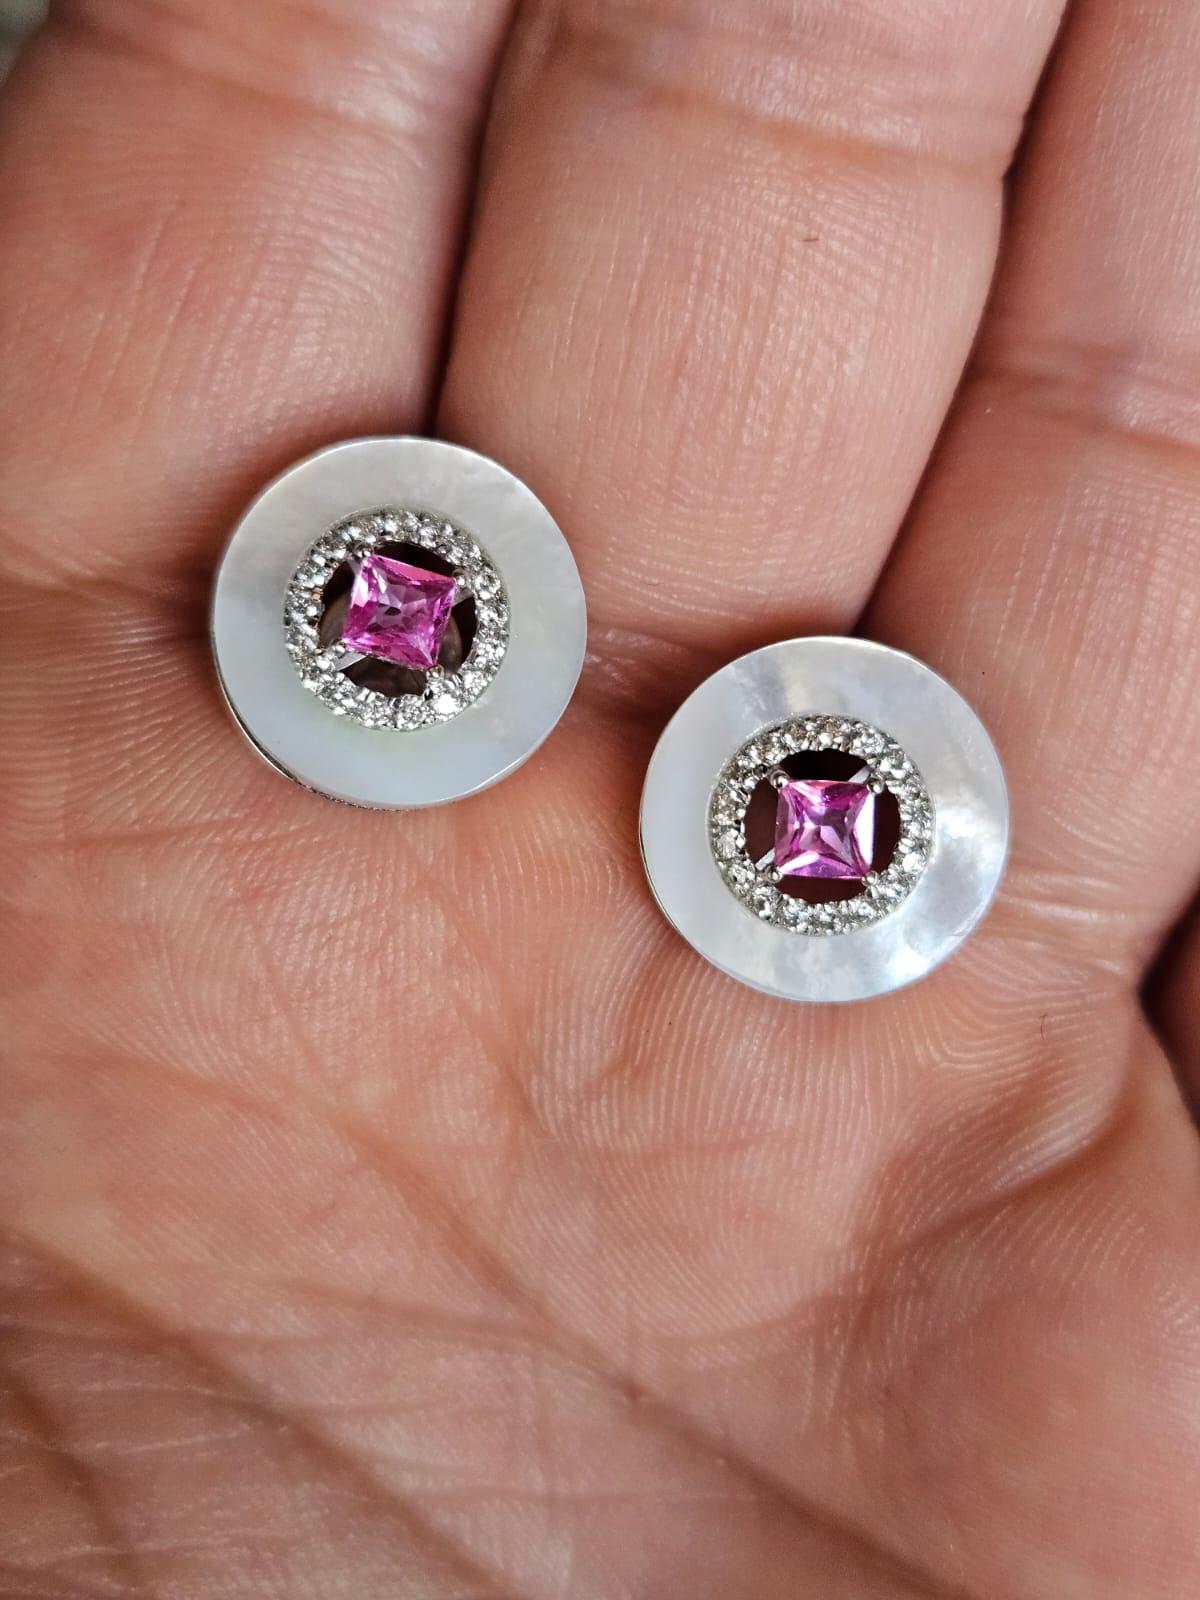 A very gorgeous and beautiful, Mother of Pearl & Pink Sapphire Stud Earrings set in 18K White Gold & Diamonds. The weight of the Pink Sapphires is 0.44 carats. The Pink Sapphires are of Ceylon (Sri Lanka) origin. The weight of Mother of Pearl is